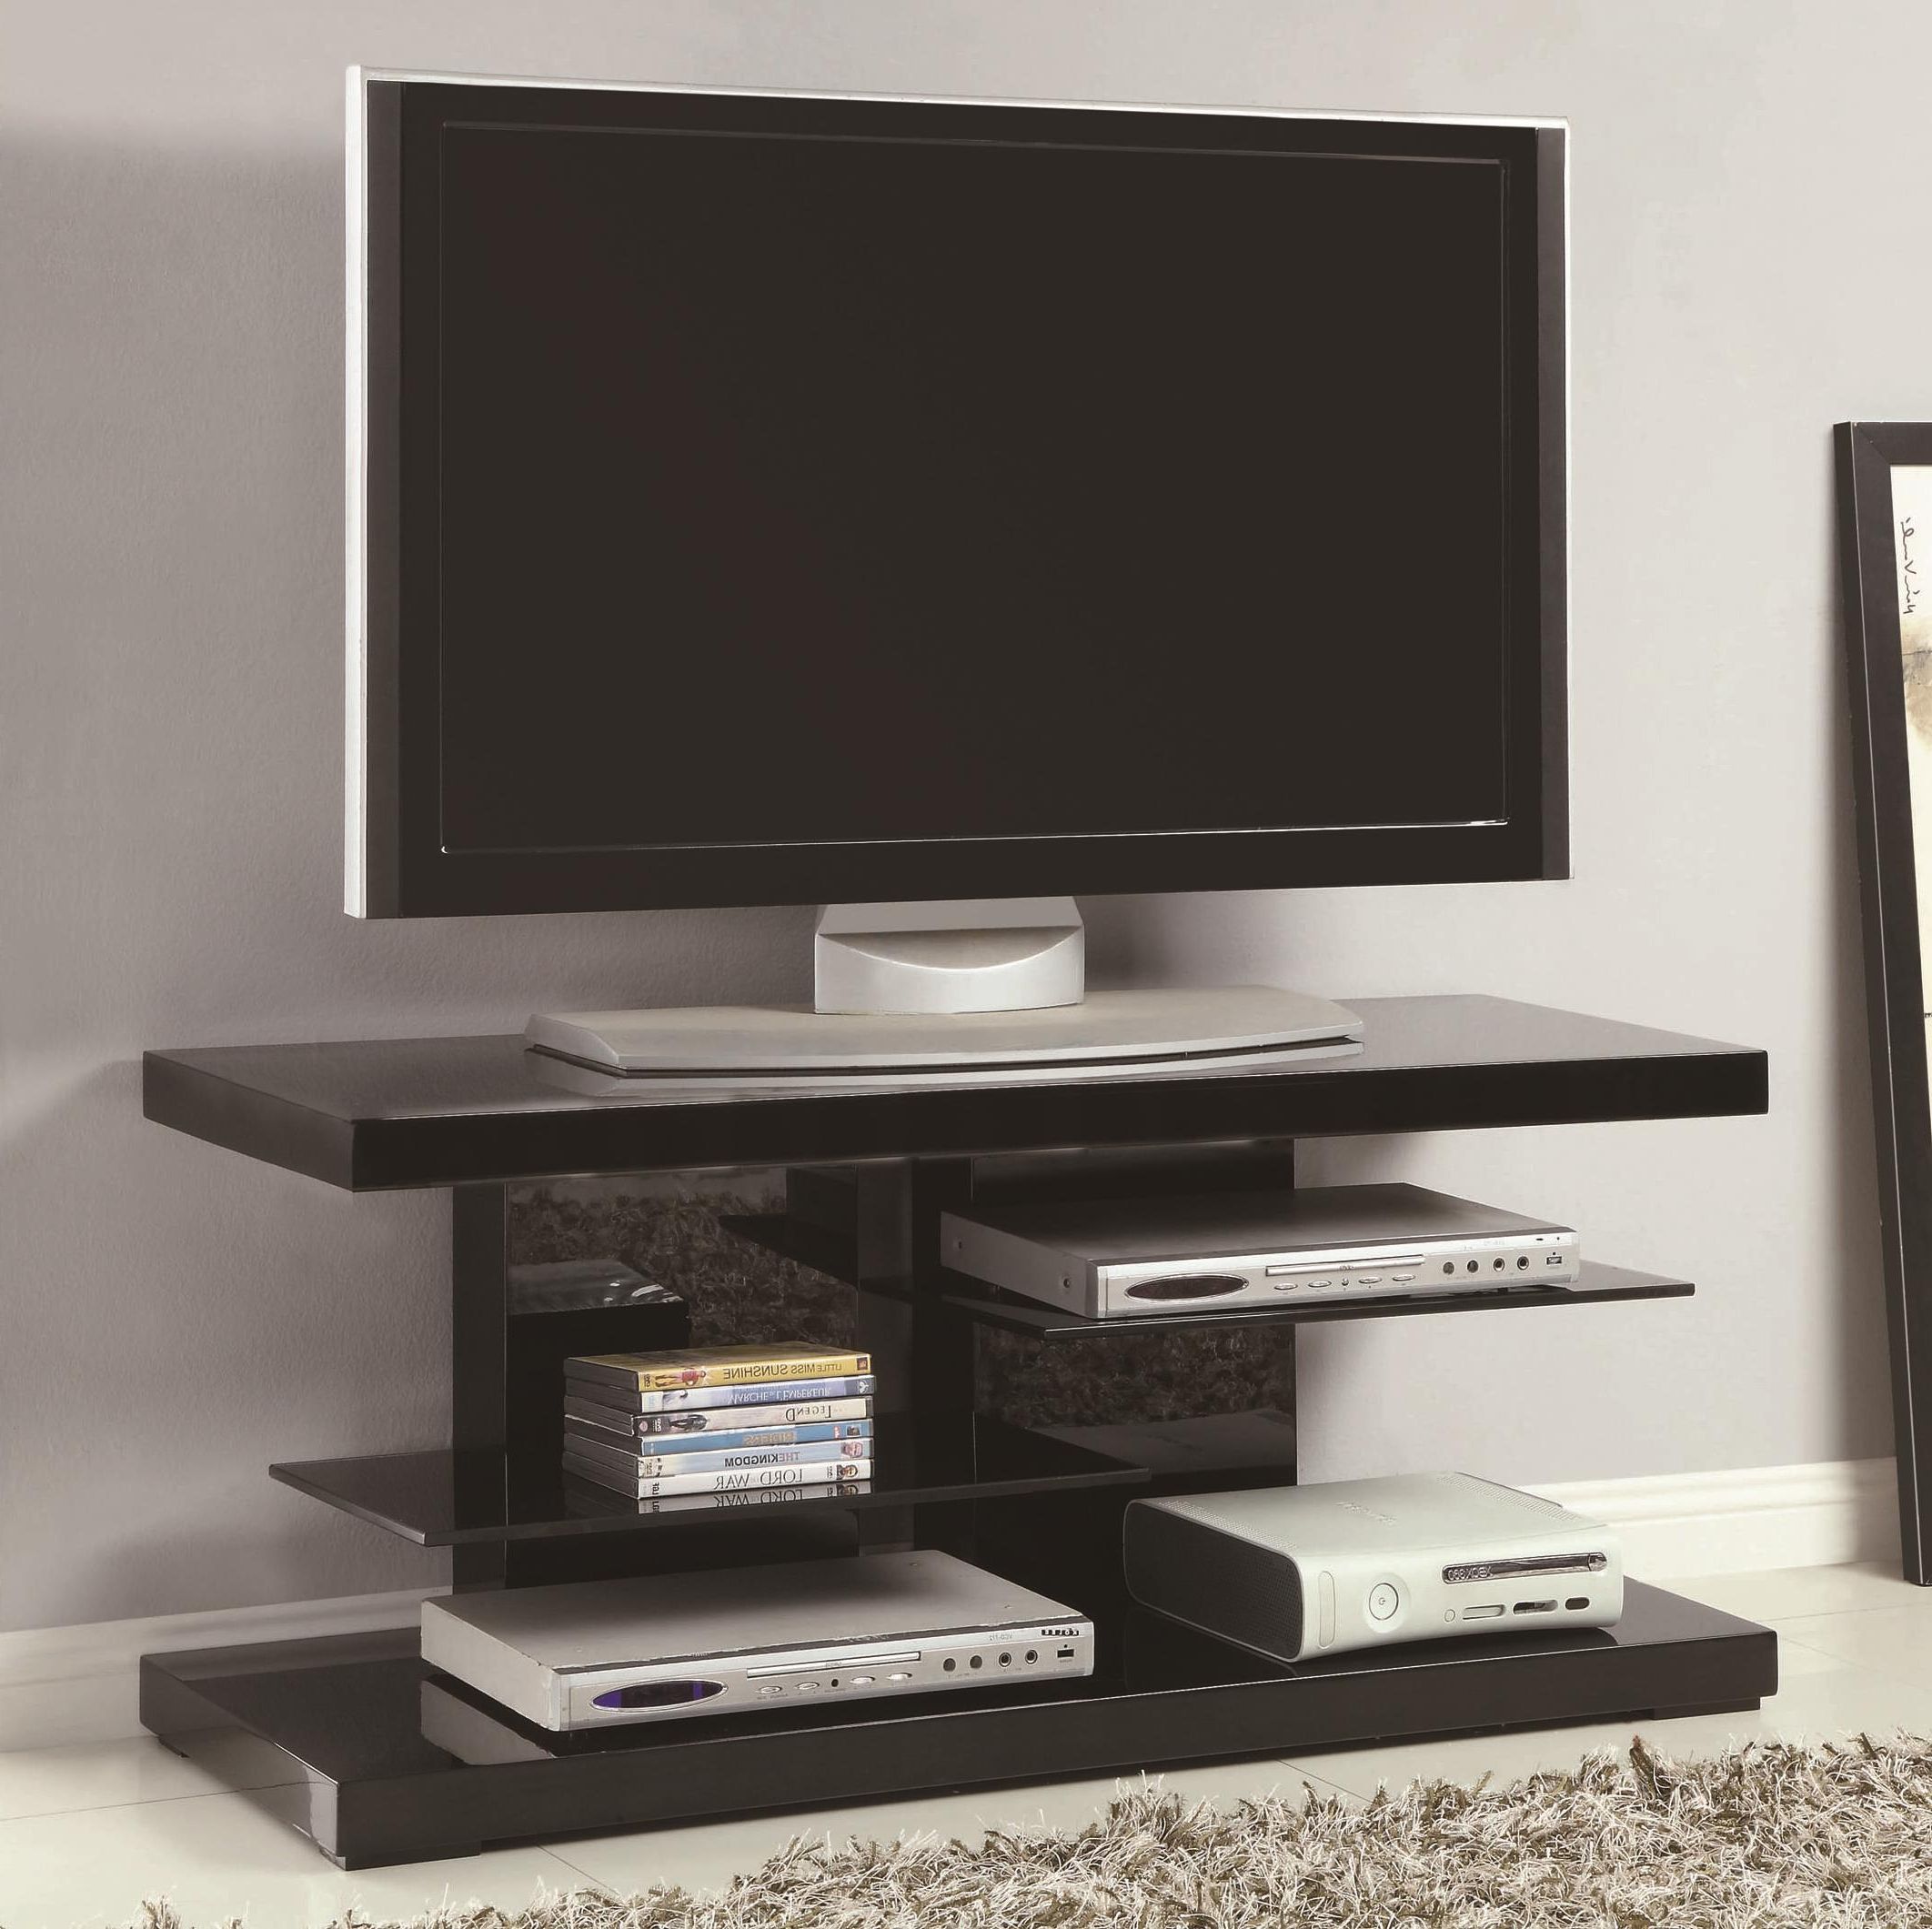 Coaster Tv Stands Modern Tv Stand With Alternating Glass Pertaining To Well Known Contemporary Black Tv Stands Corner Glass Shelf (View 7 of 10)